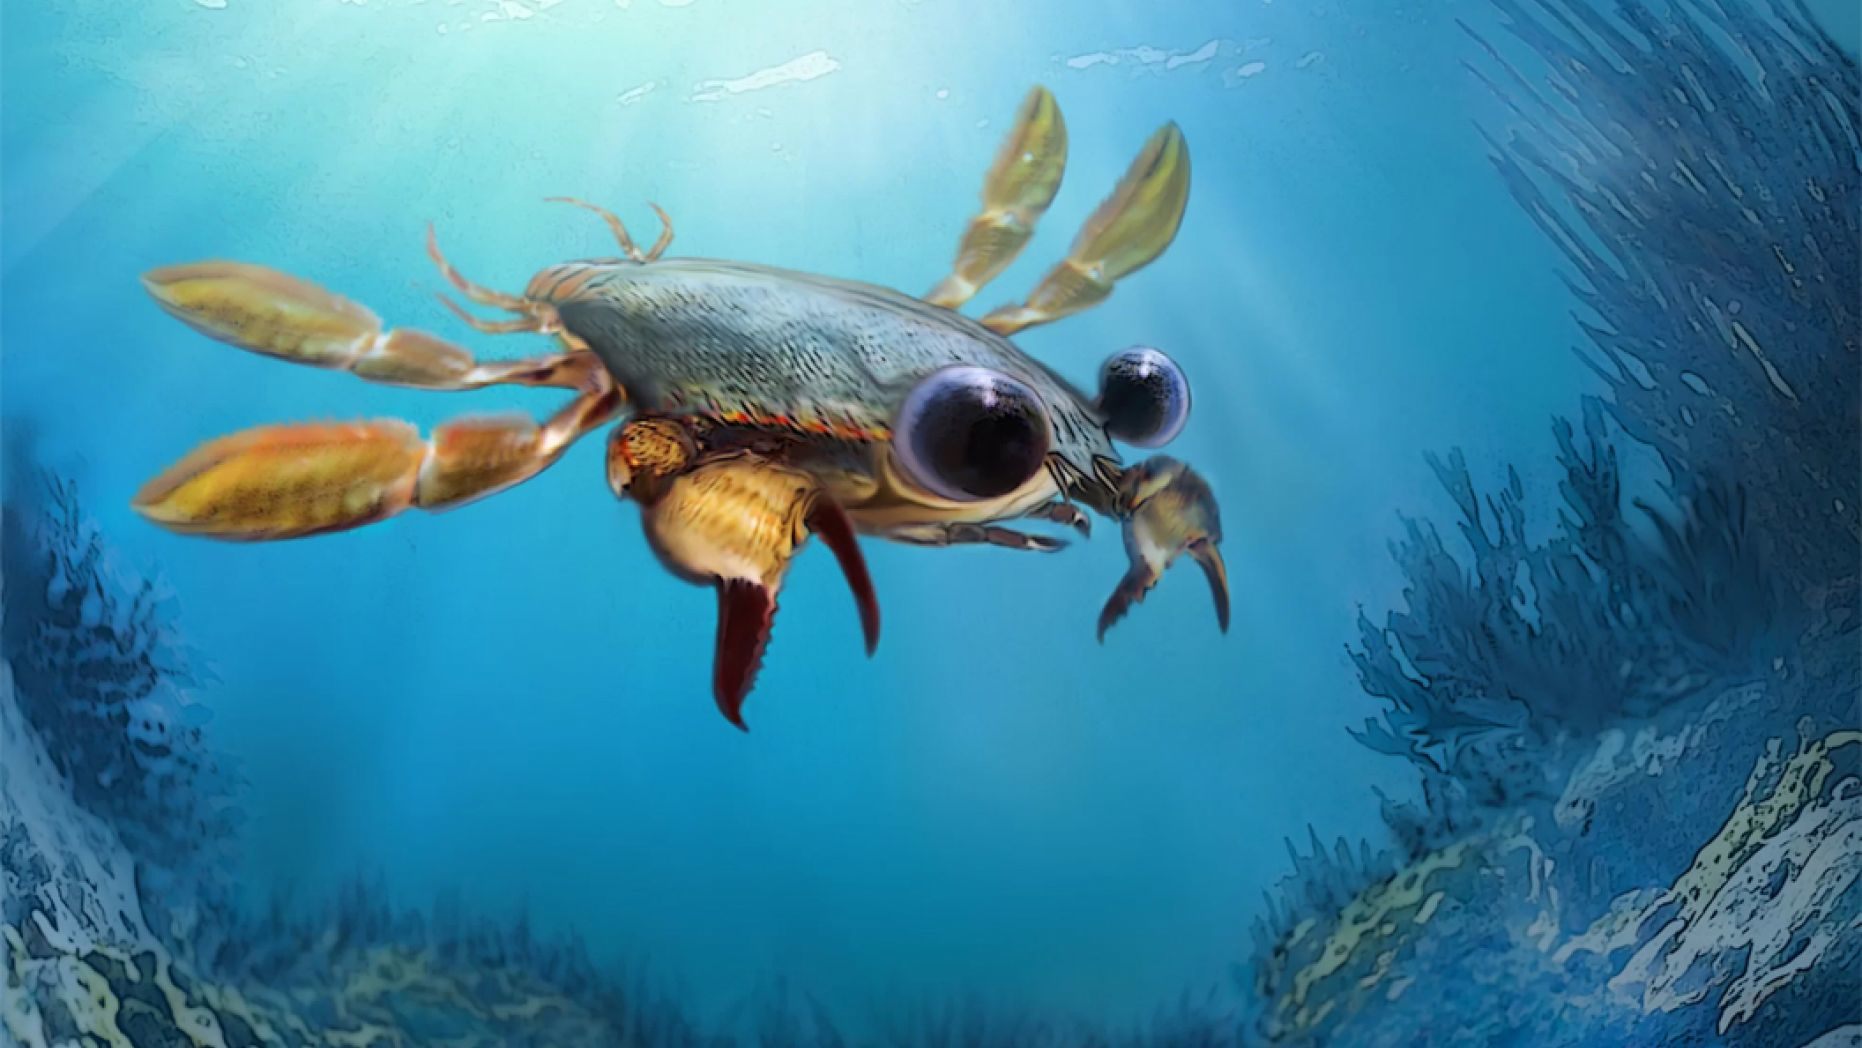 'Utterly Bizarre' Chimera Crab Fossil Discovered